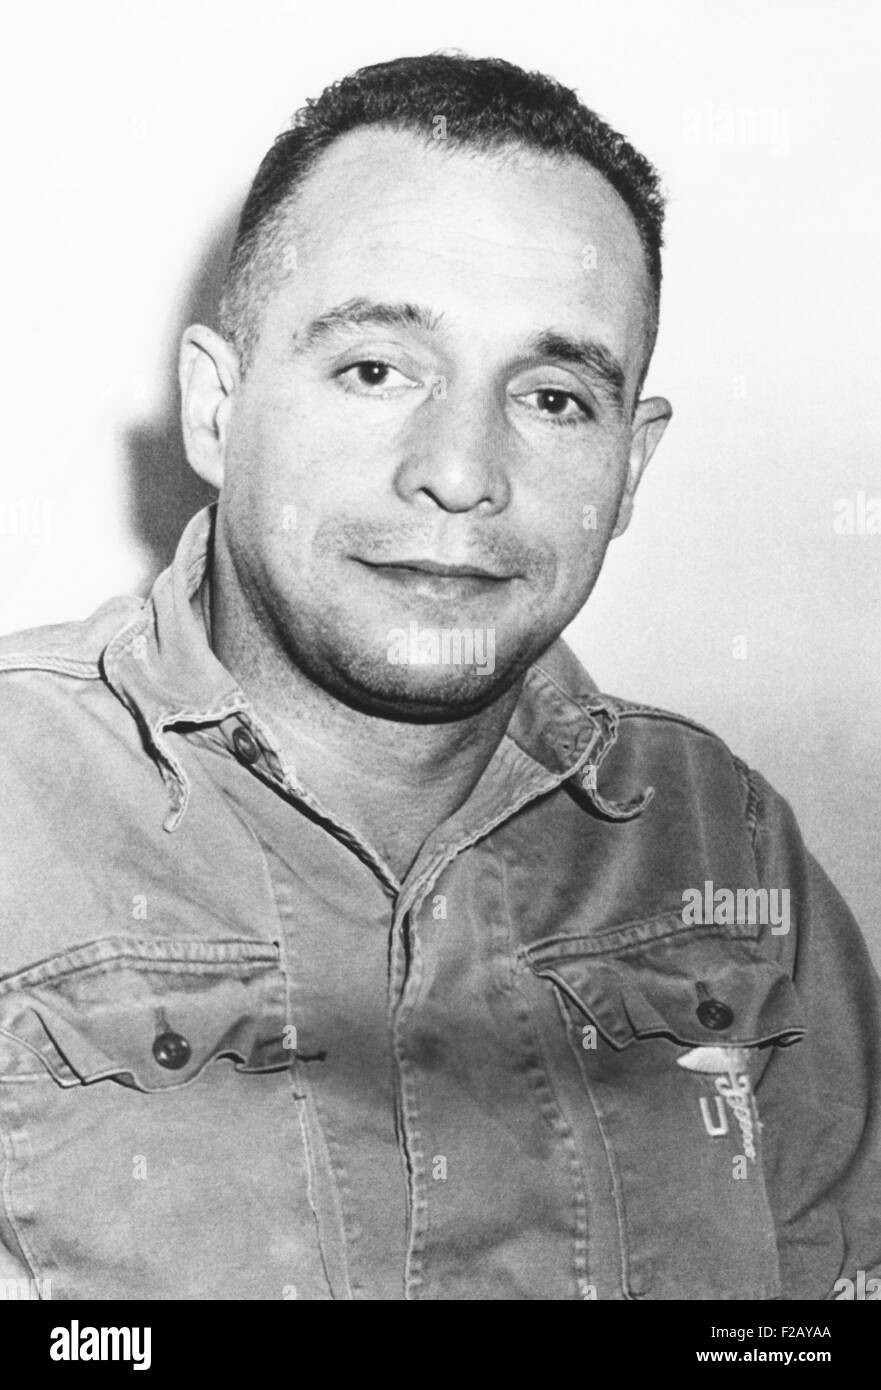 Richard Fecteau, 44, after his release from a Chinese prison after 19 years in Dec. 1971. He was captured by the Red Chinese during a CIA-sponsored flight over China during the Korean War. In 2013, Fecteau received the CIA's the Distinguished Intelligence Cross. (CSU 2015 9 818) Stock Photo